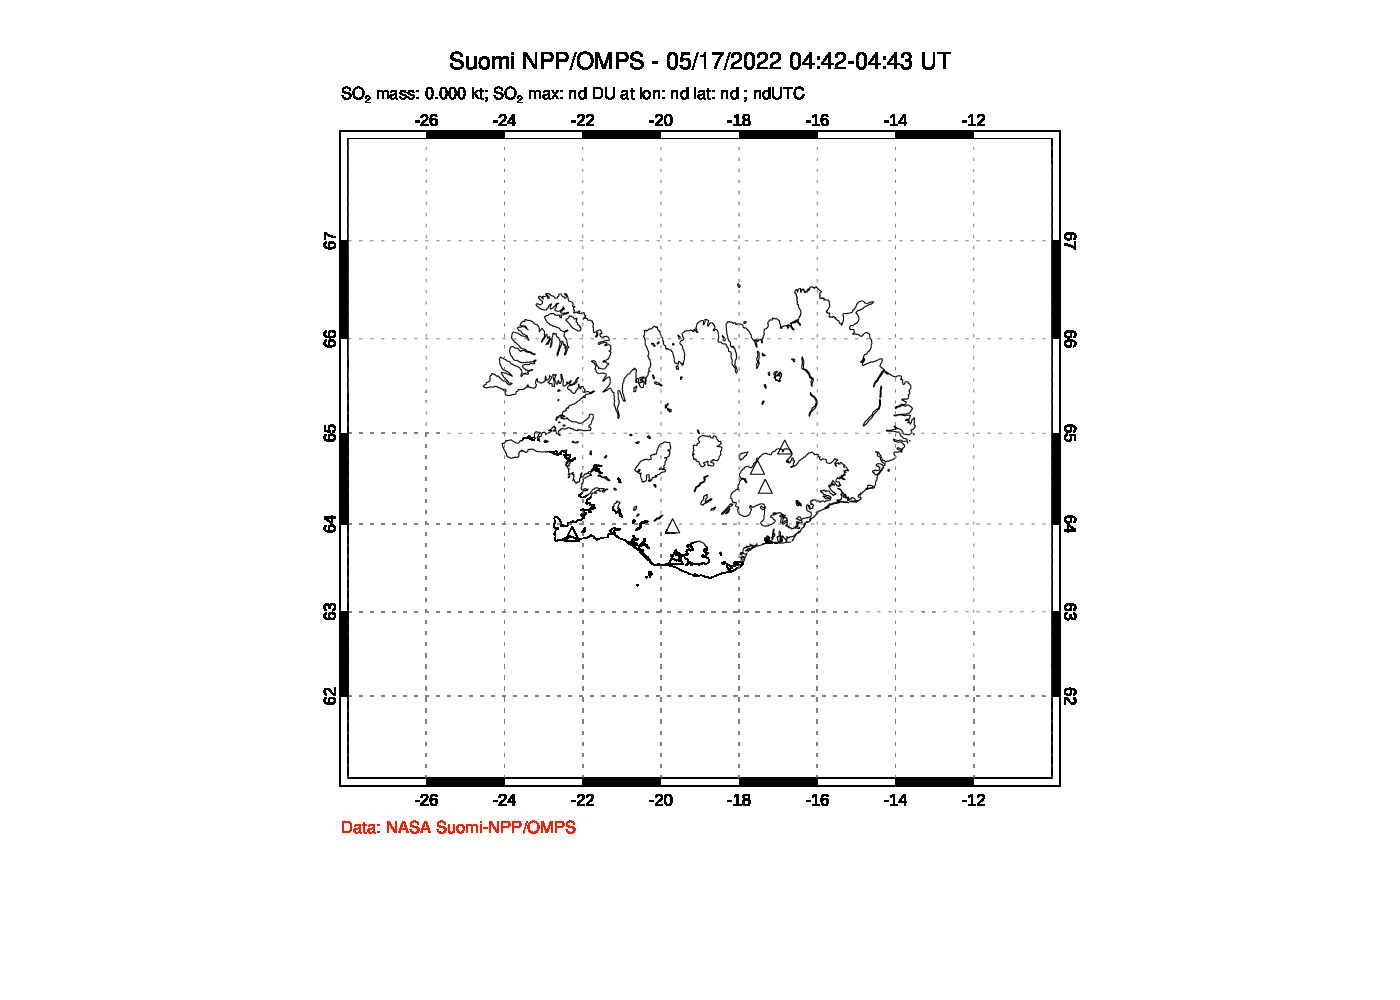 A sulfur dioxide image over Iceland on May 17, 2022.